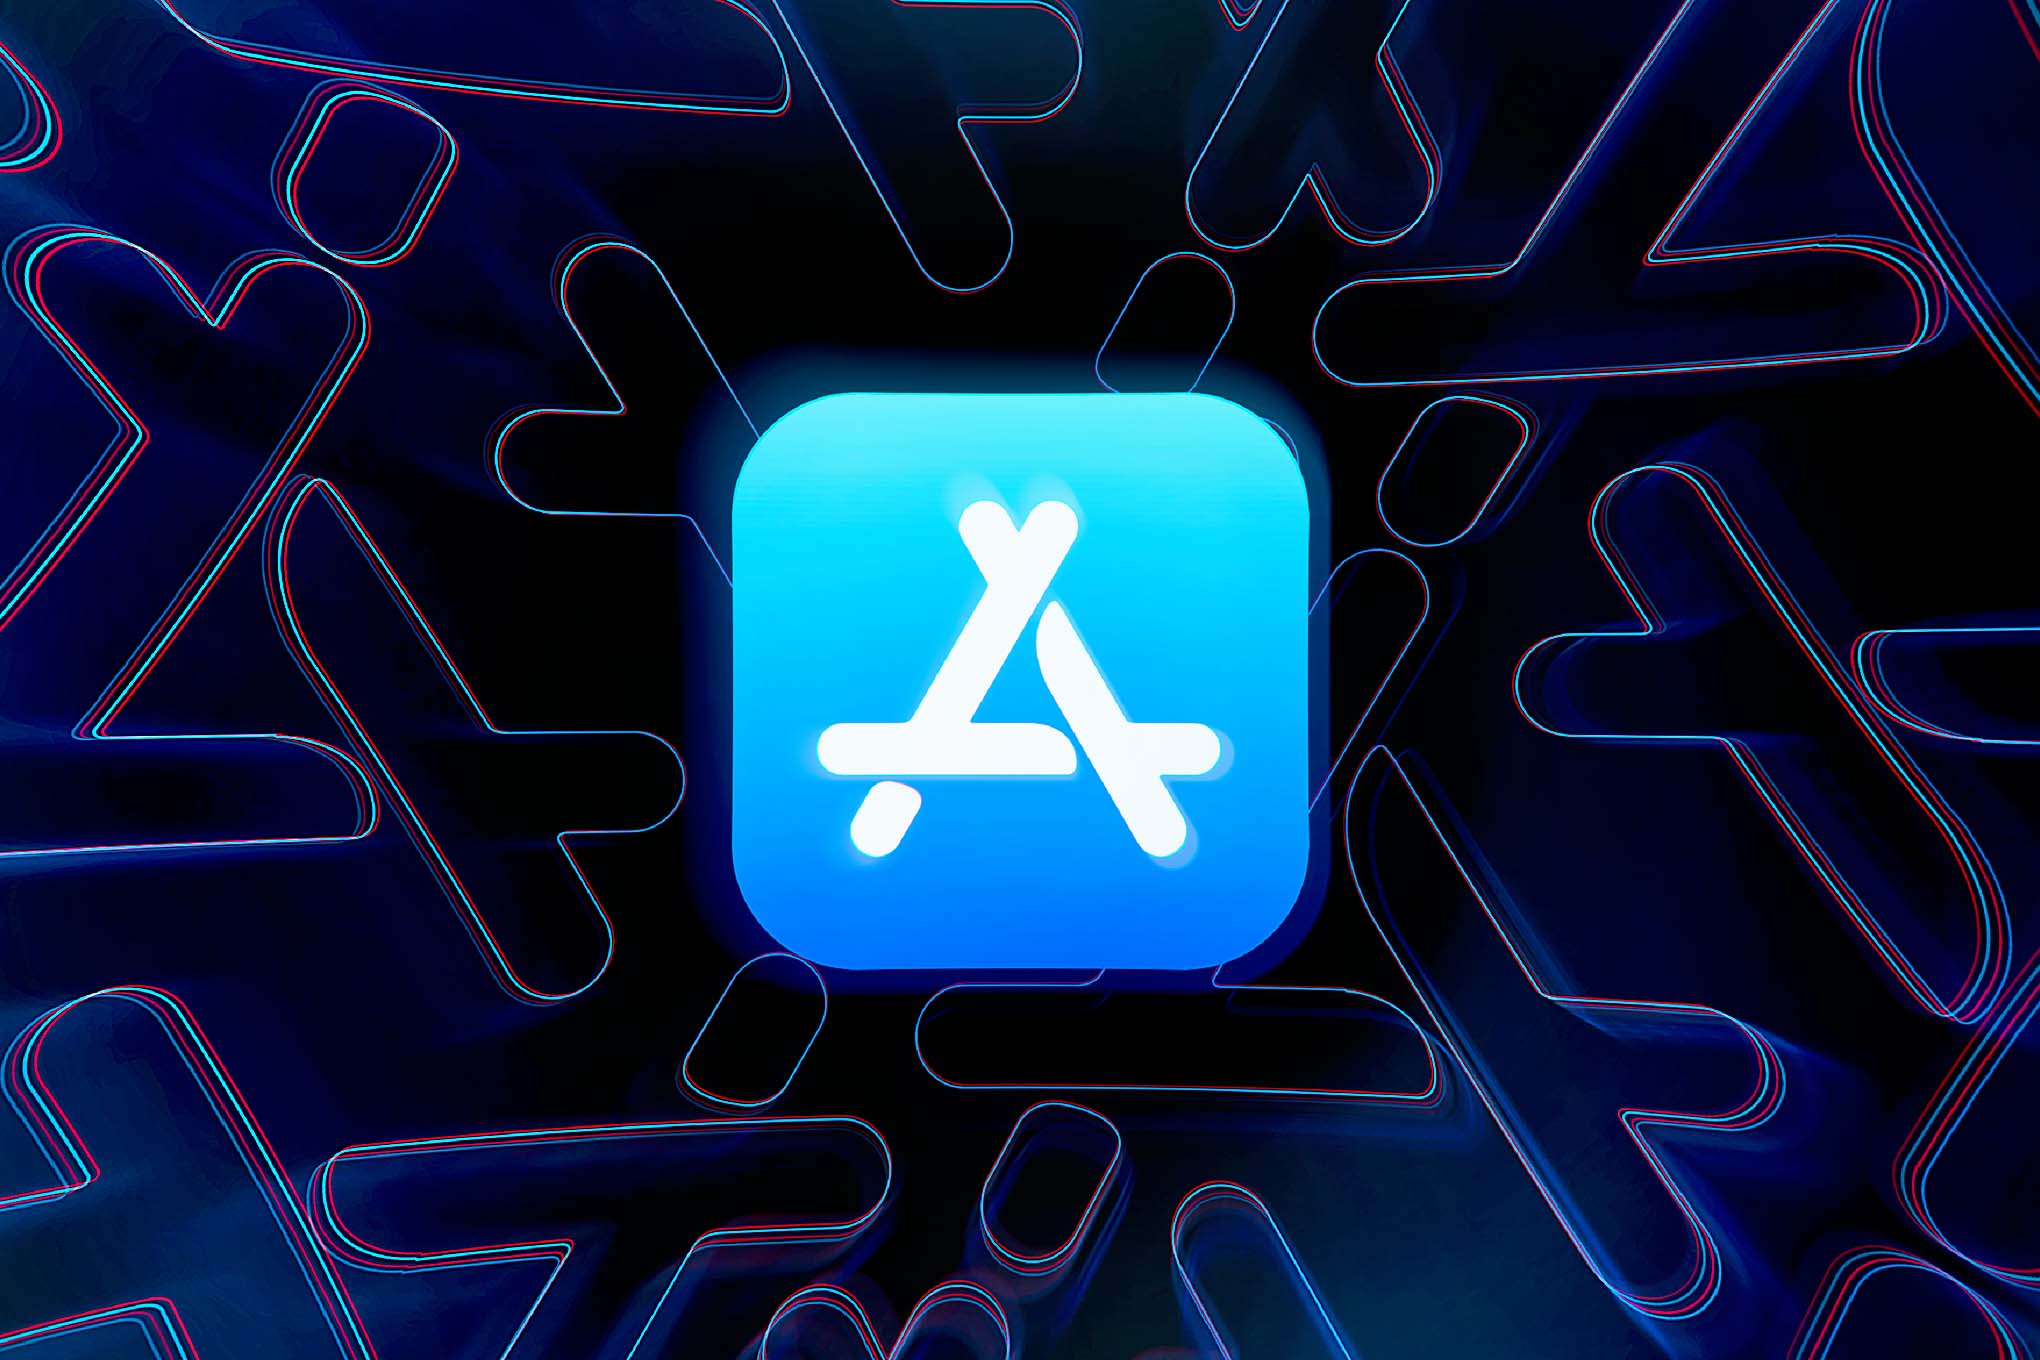 Apple allows App Store users to report fraudulent apps